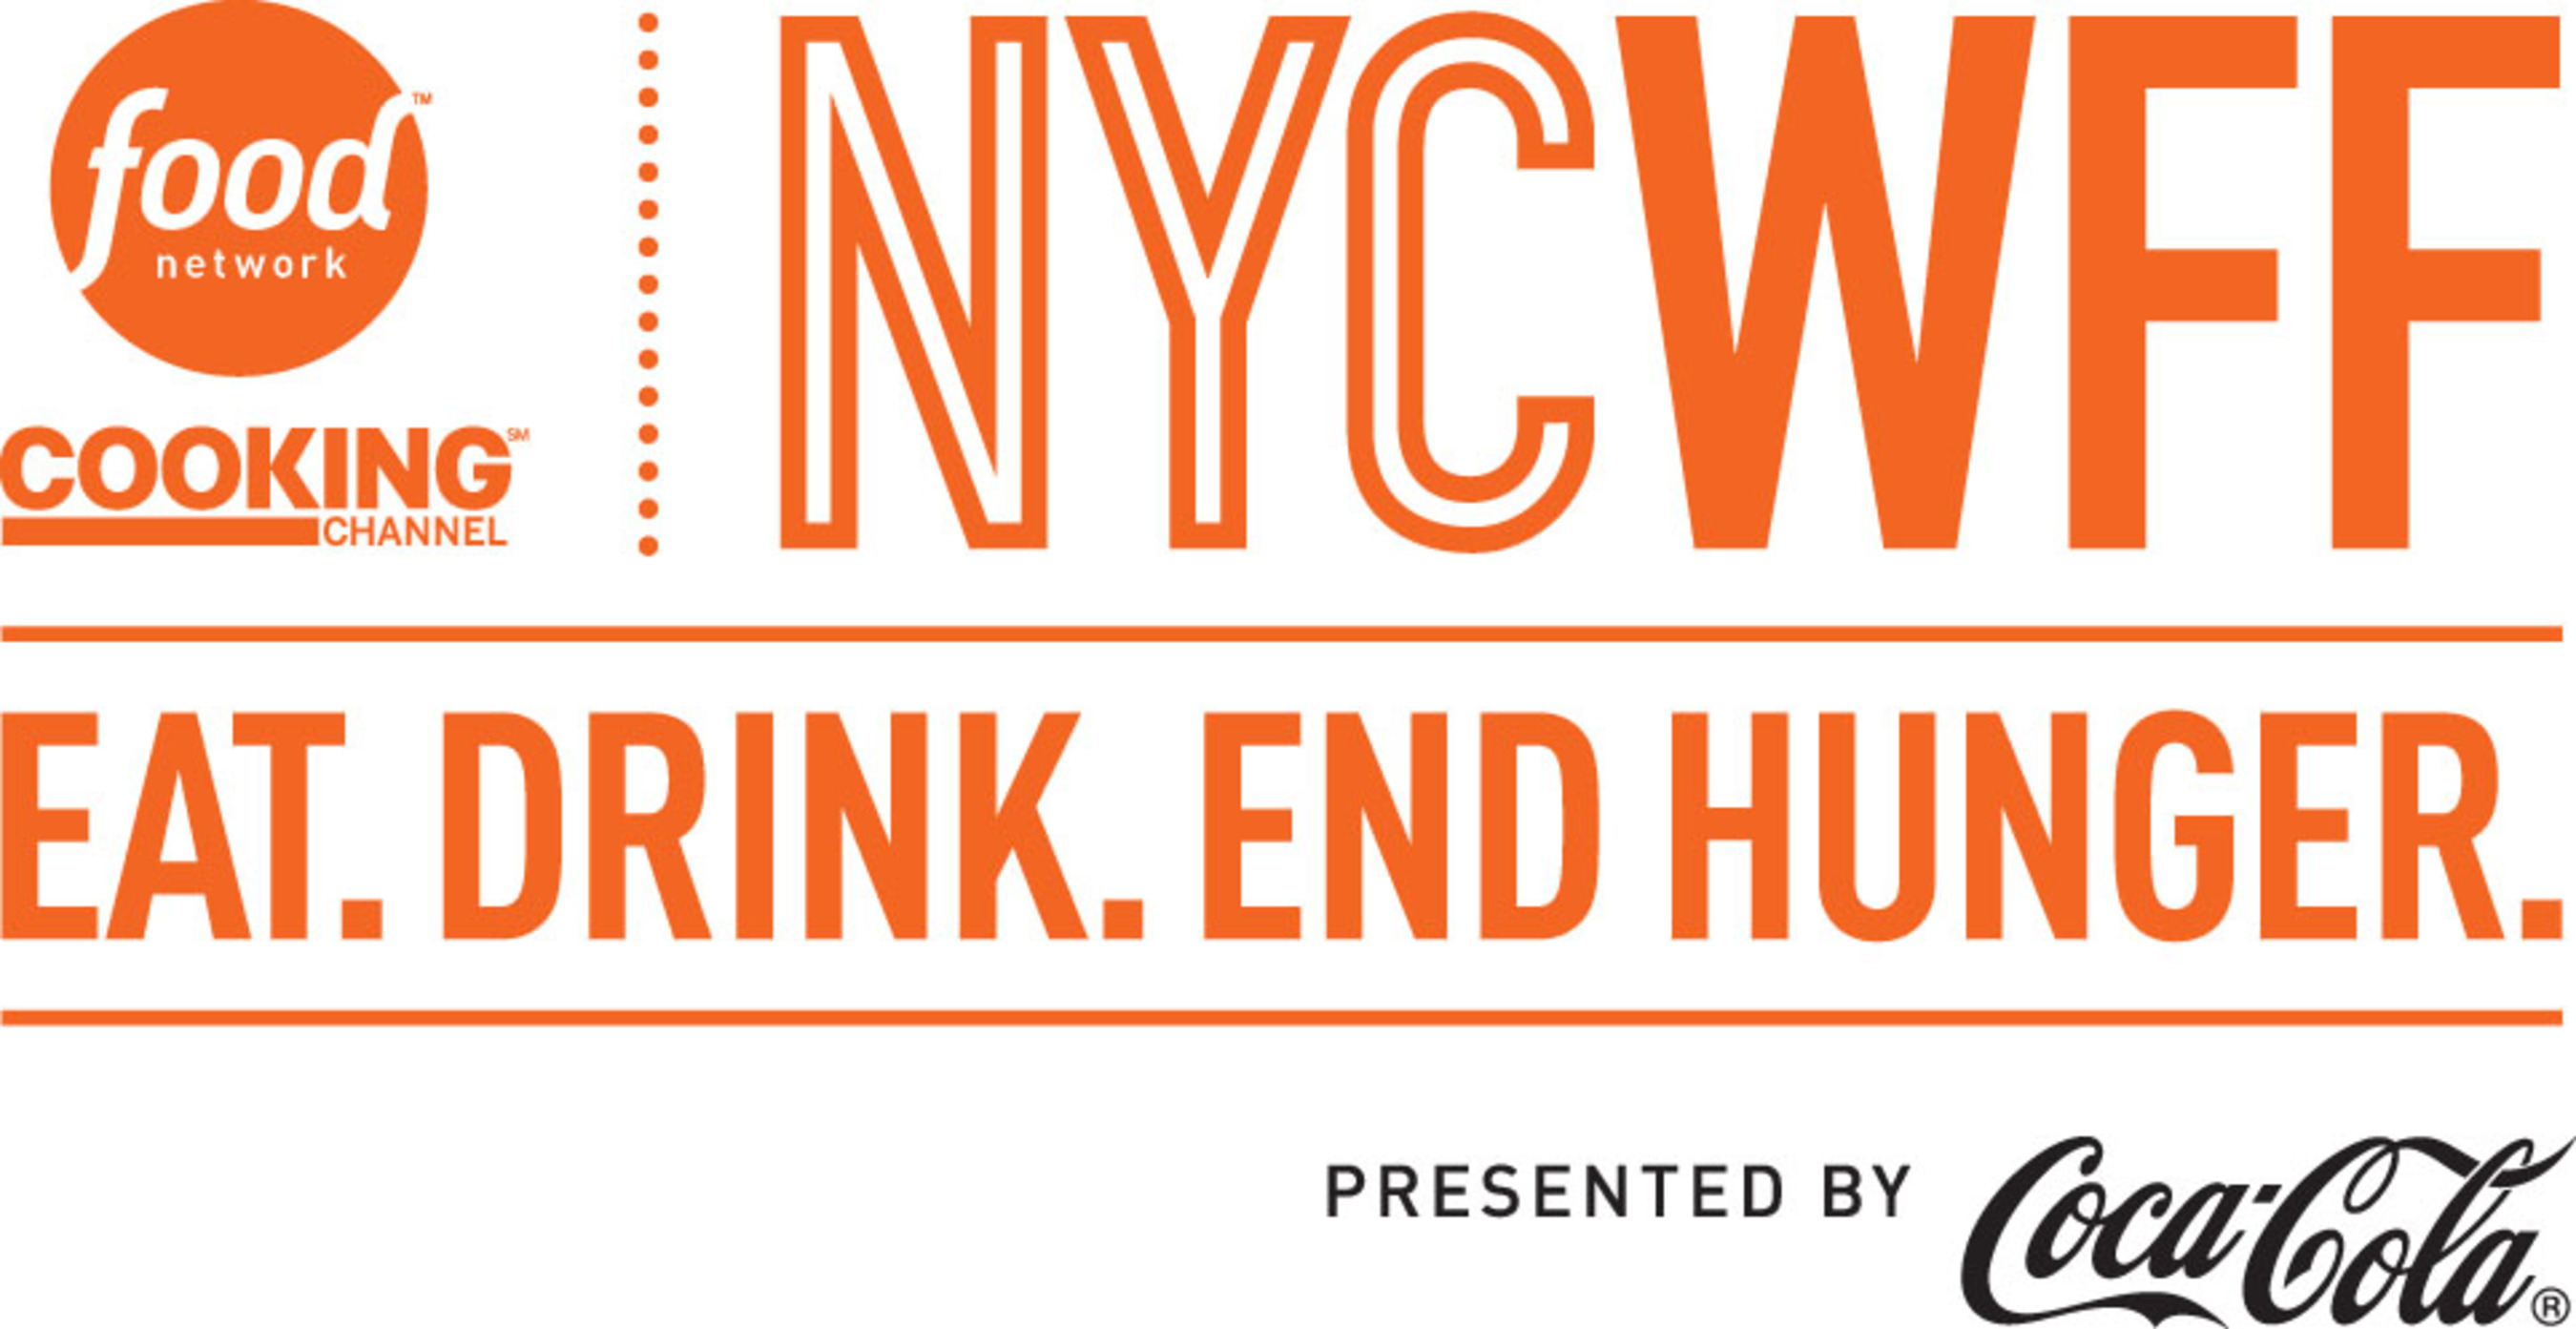 100% of the net proceeds from the Food Network & Cooking Channel New York City Wine & Food Festival benefit the hunger-relief organizations No Kid Hungry(R) and Food Bank For New York City. (PRNewsFoto/Food Network & Cooking Channel)